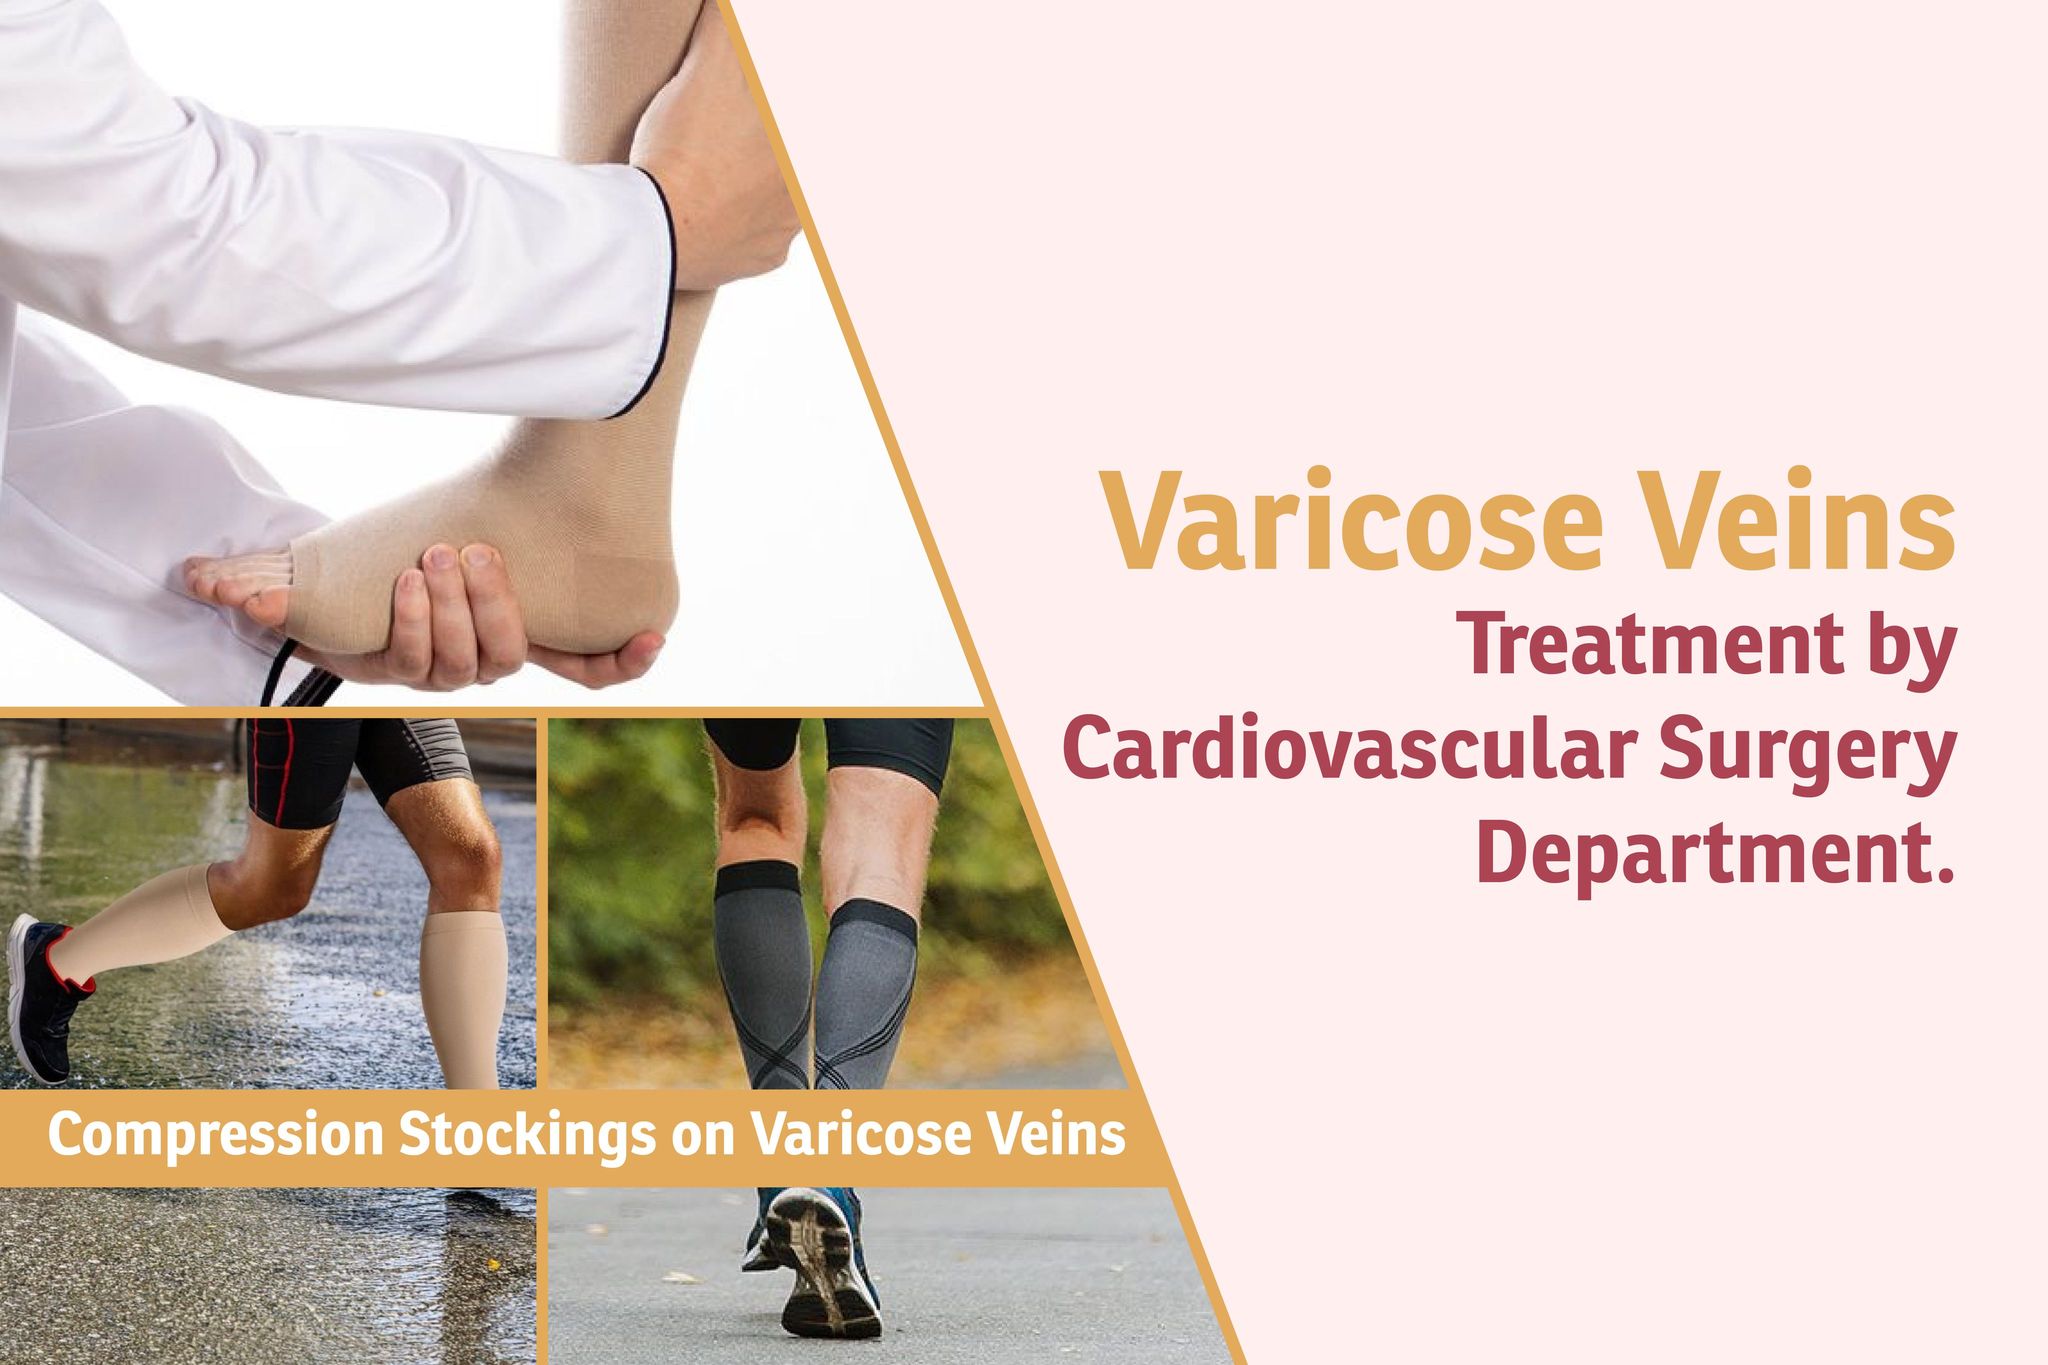 Compression Stockings on Varicose Veins